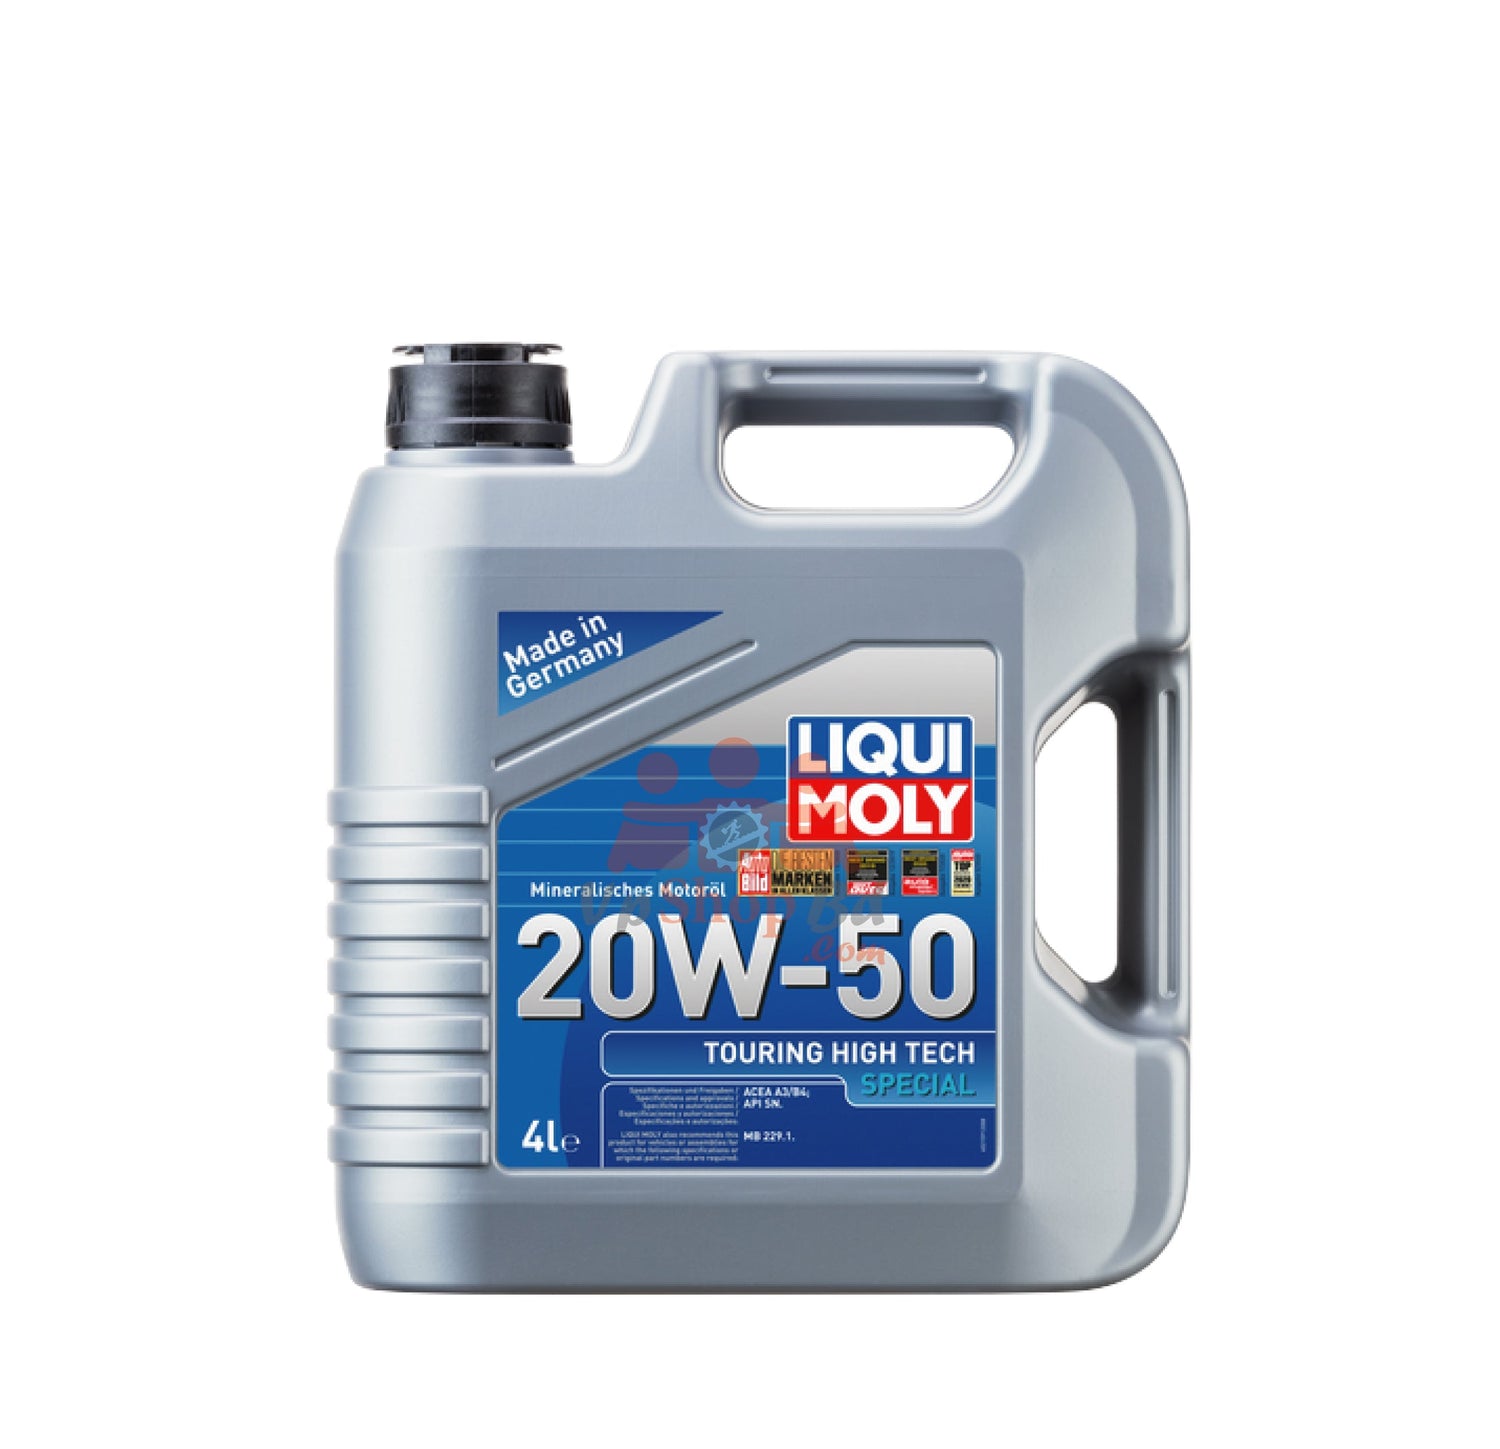 Liqui Moly Touring High Tech Special 20W-50 Mineral 4L